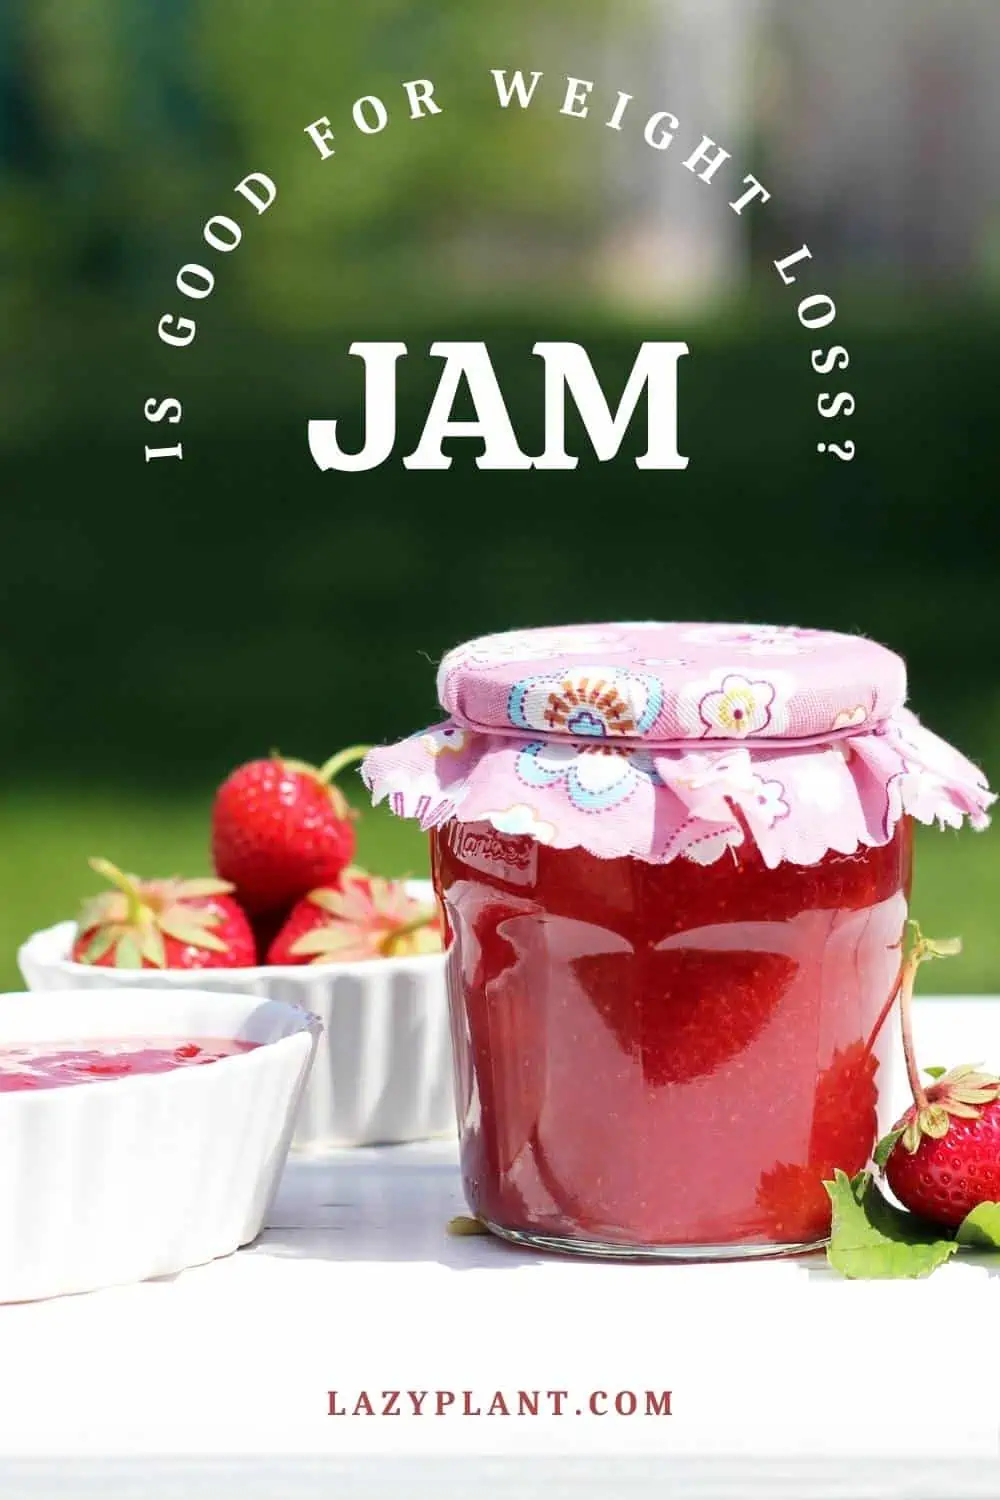 Premium, sugar-free jam, jelly or marmalade is good for weight loss!